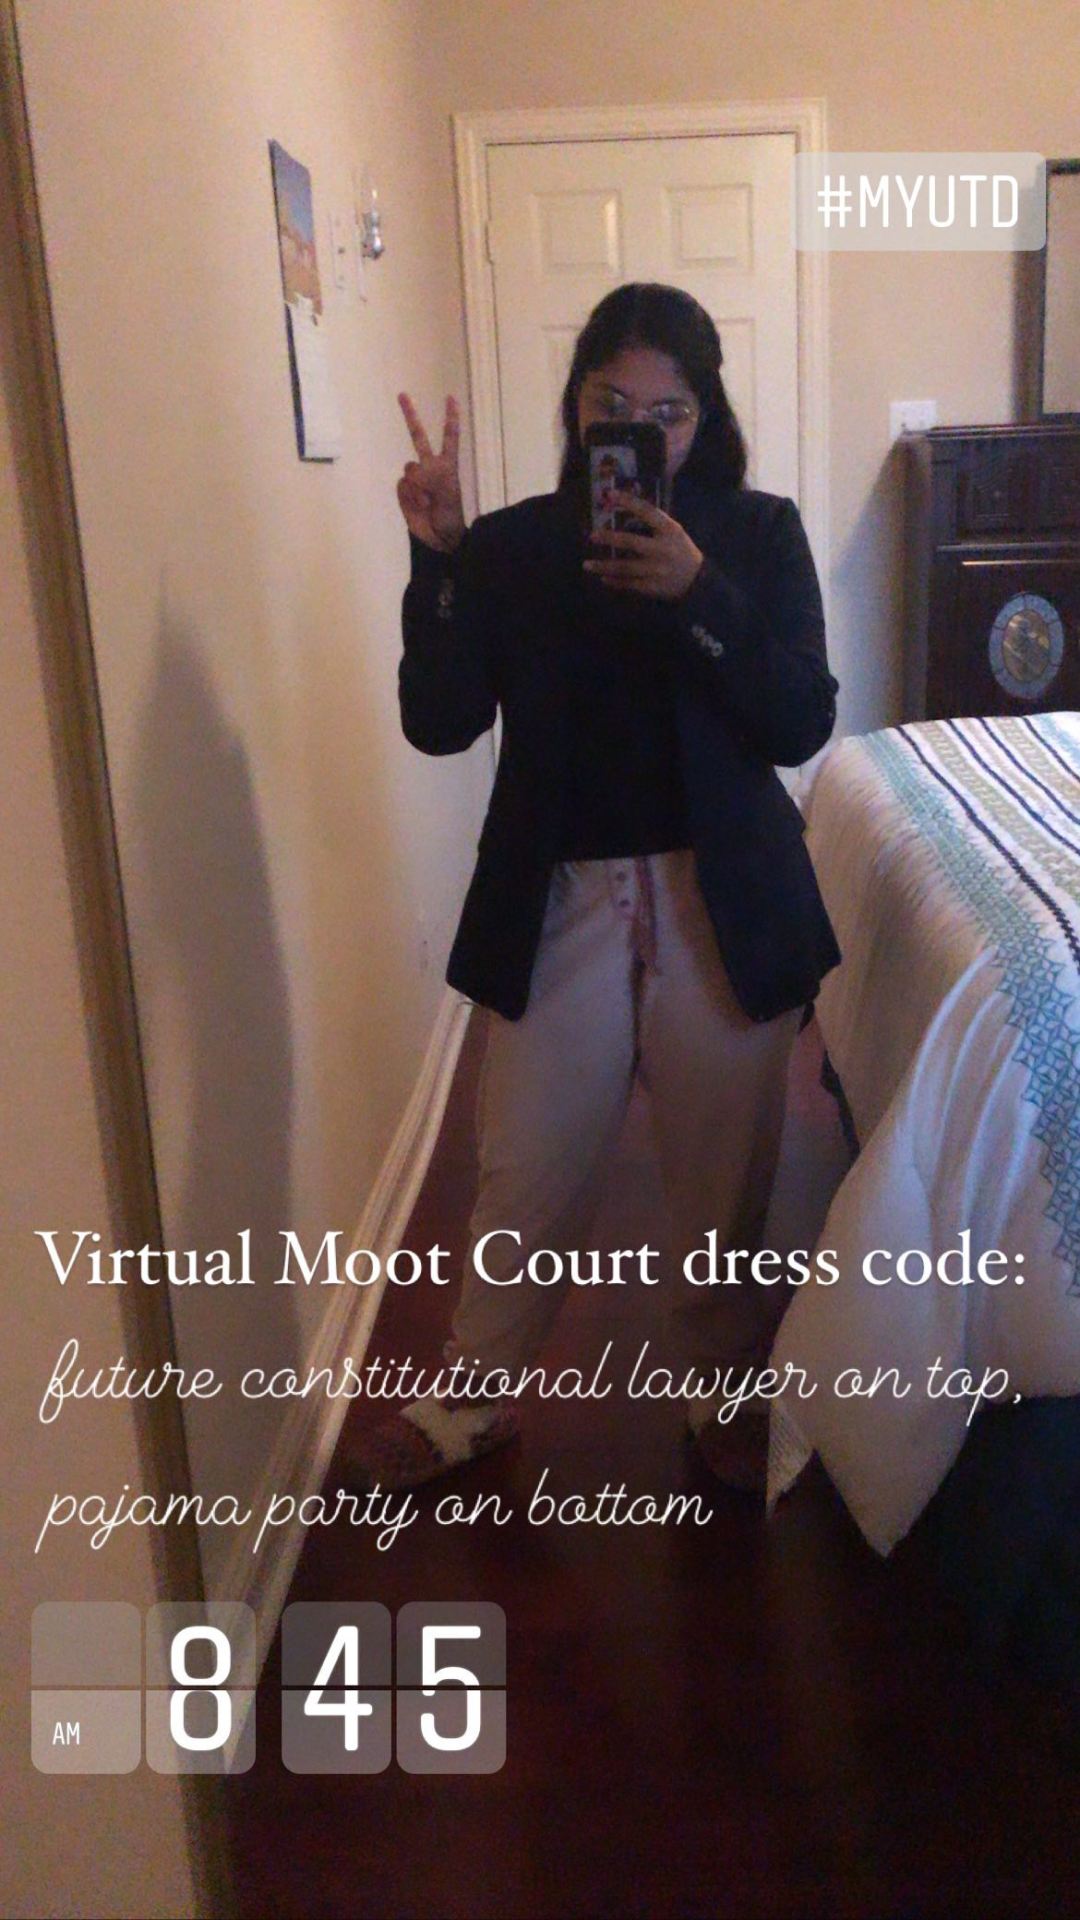 Virtual Moot Court outfit.